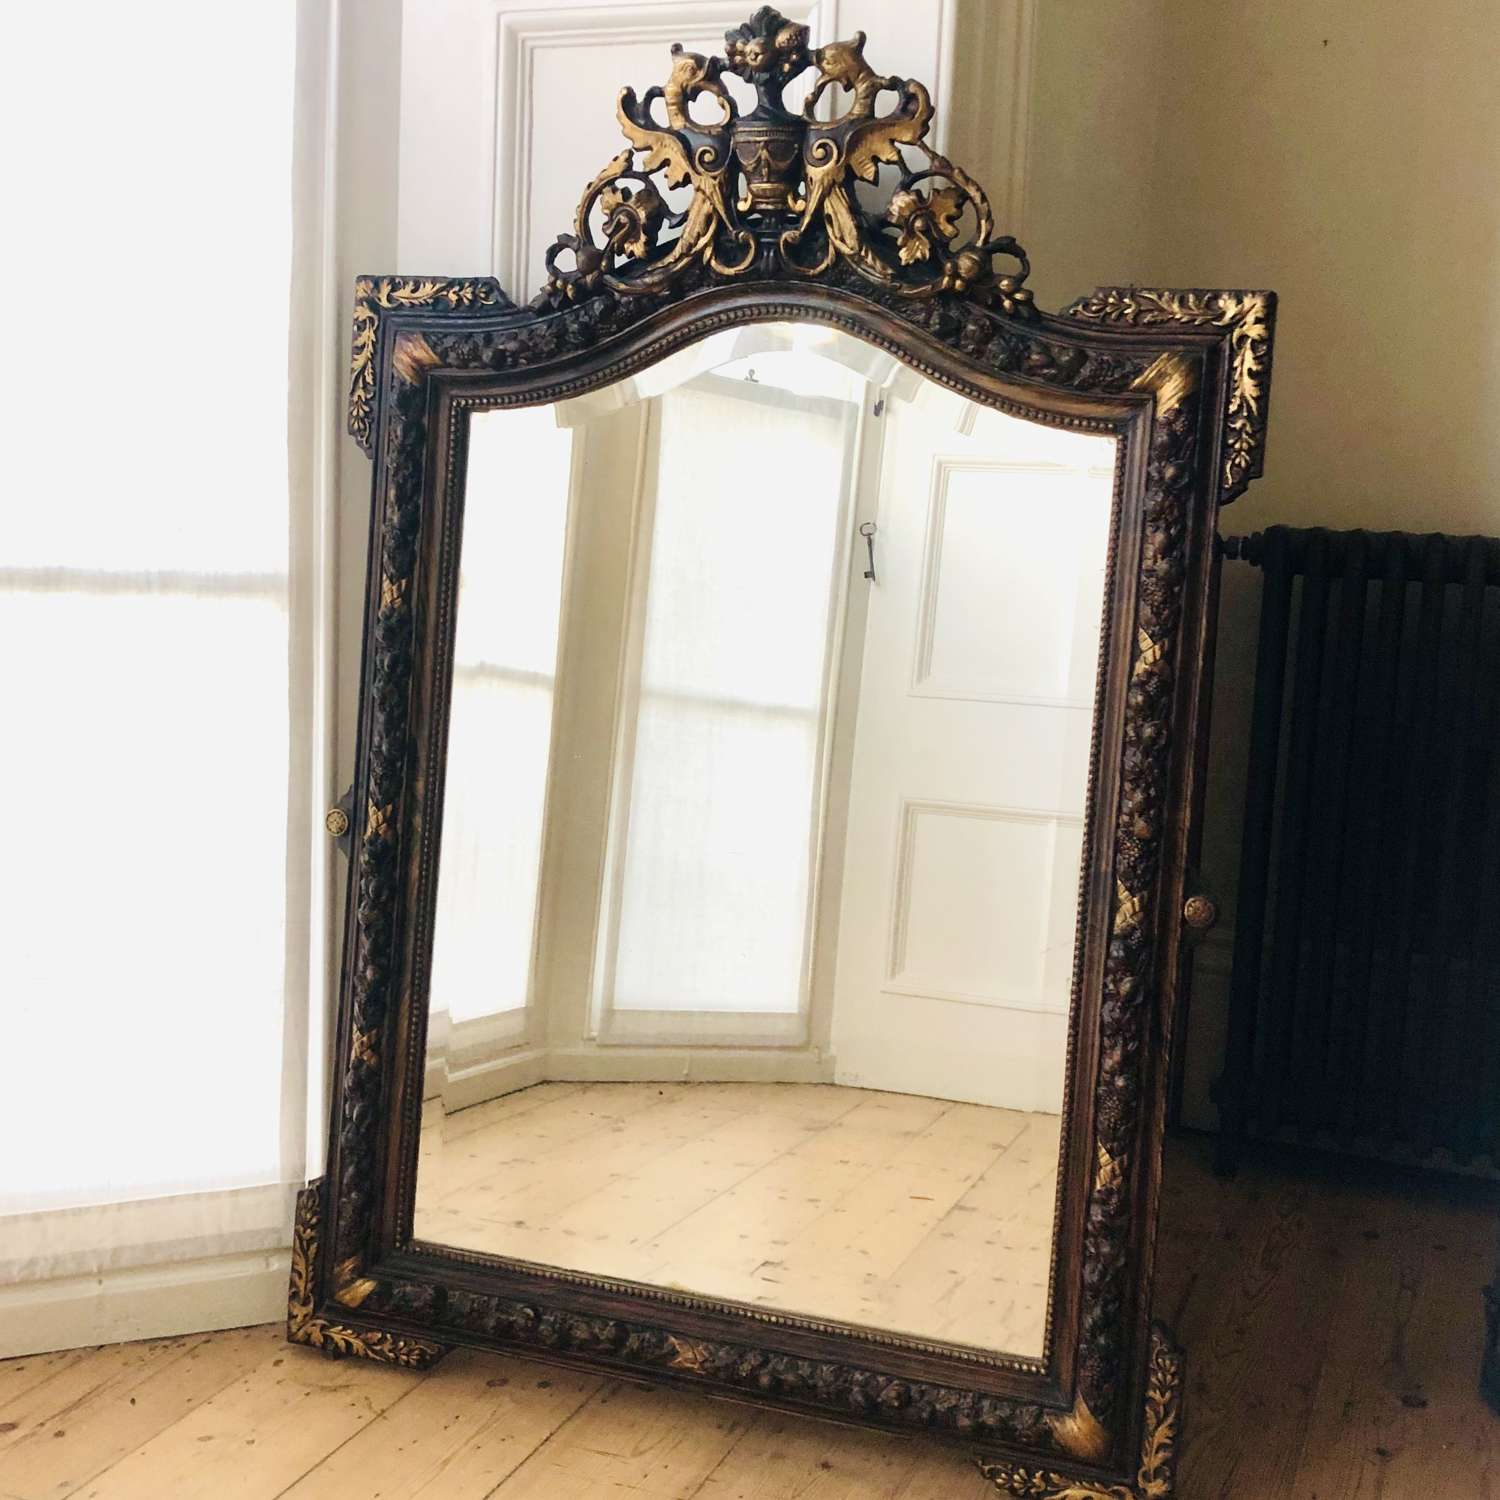 Antique French crested mirror - bevelled glass